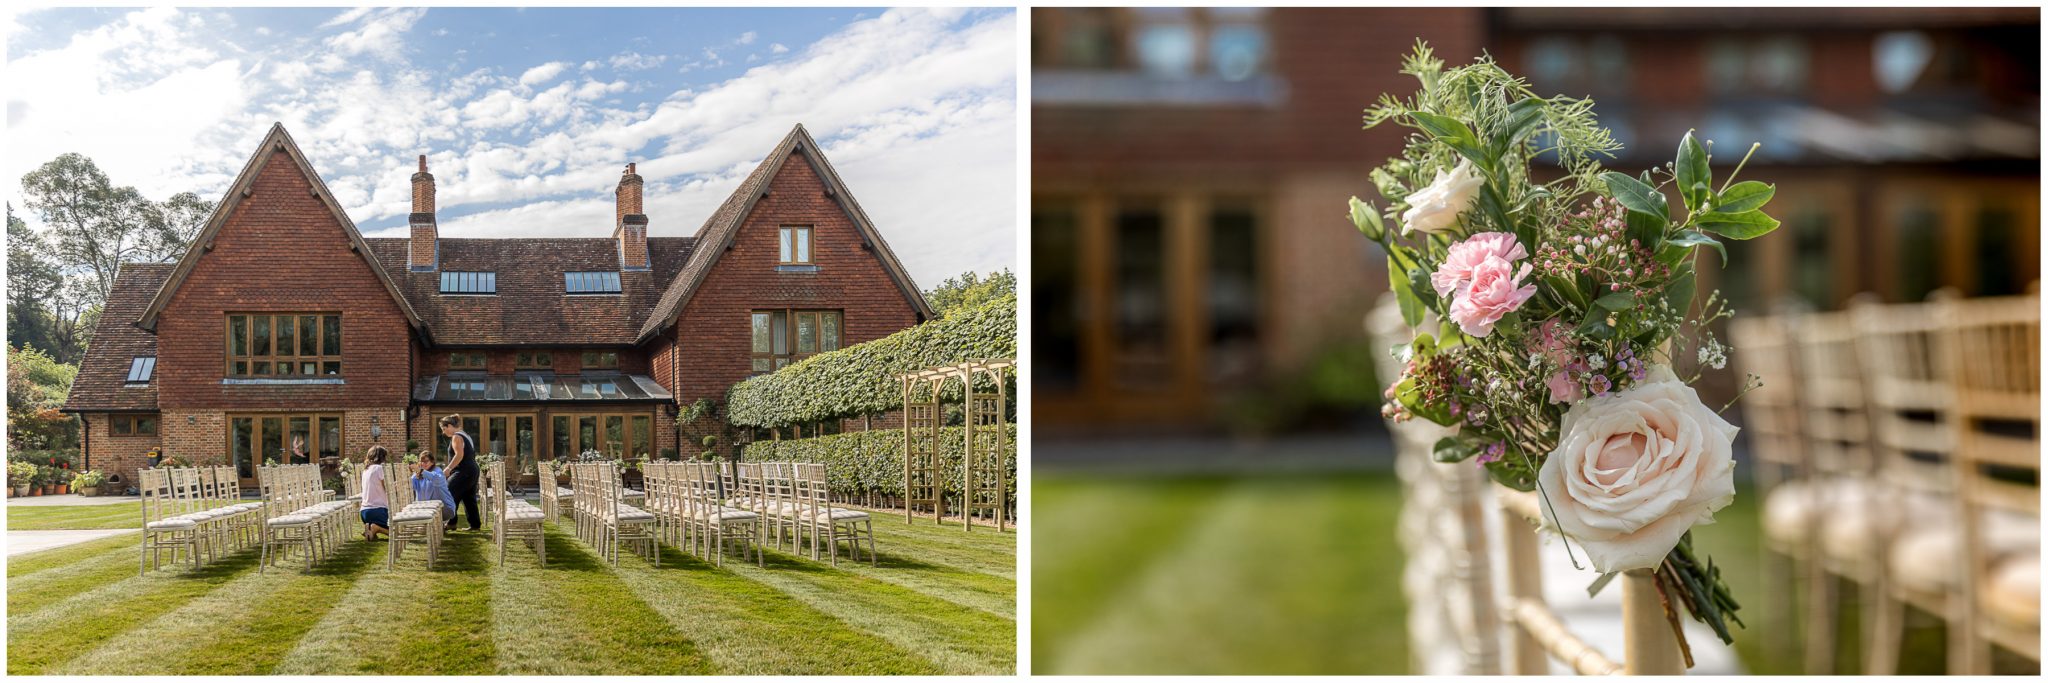 Exterior details of garden seating for ceremony and flowers on chairs